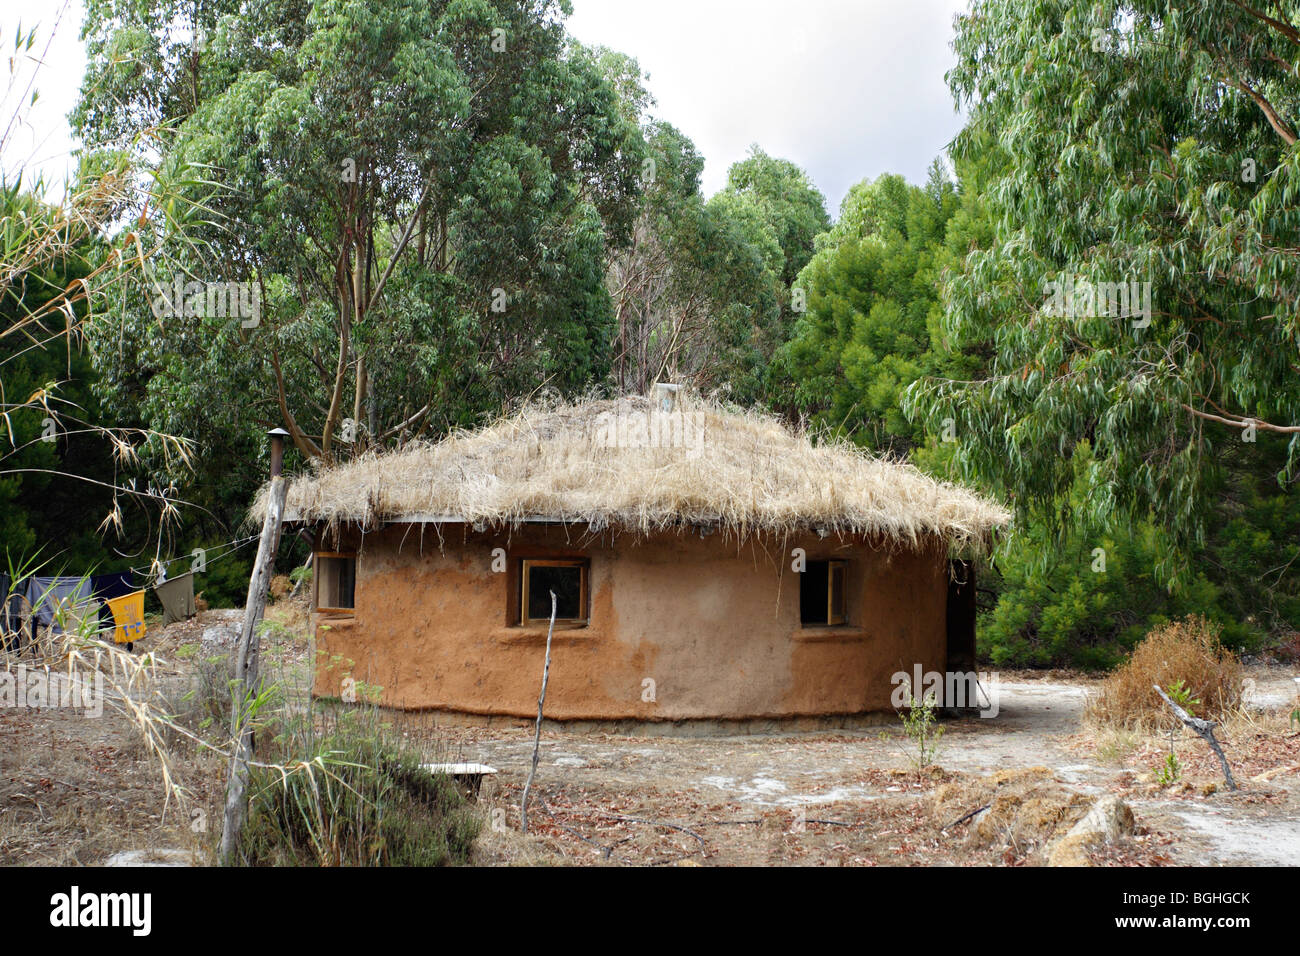 A lodge made from straw at a resort in Margaret River, Western Australia. Stock Photo